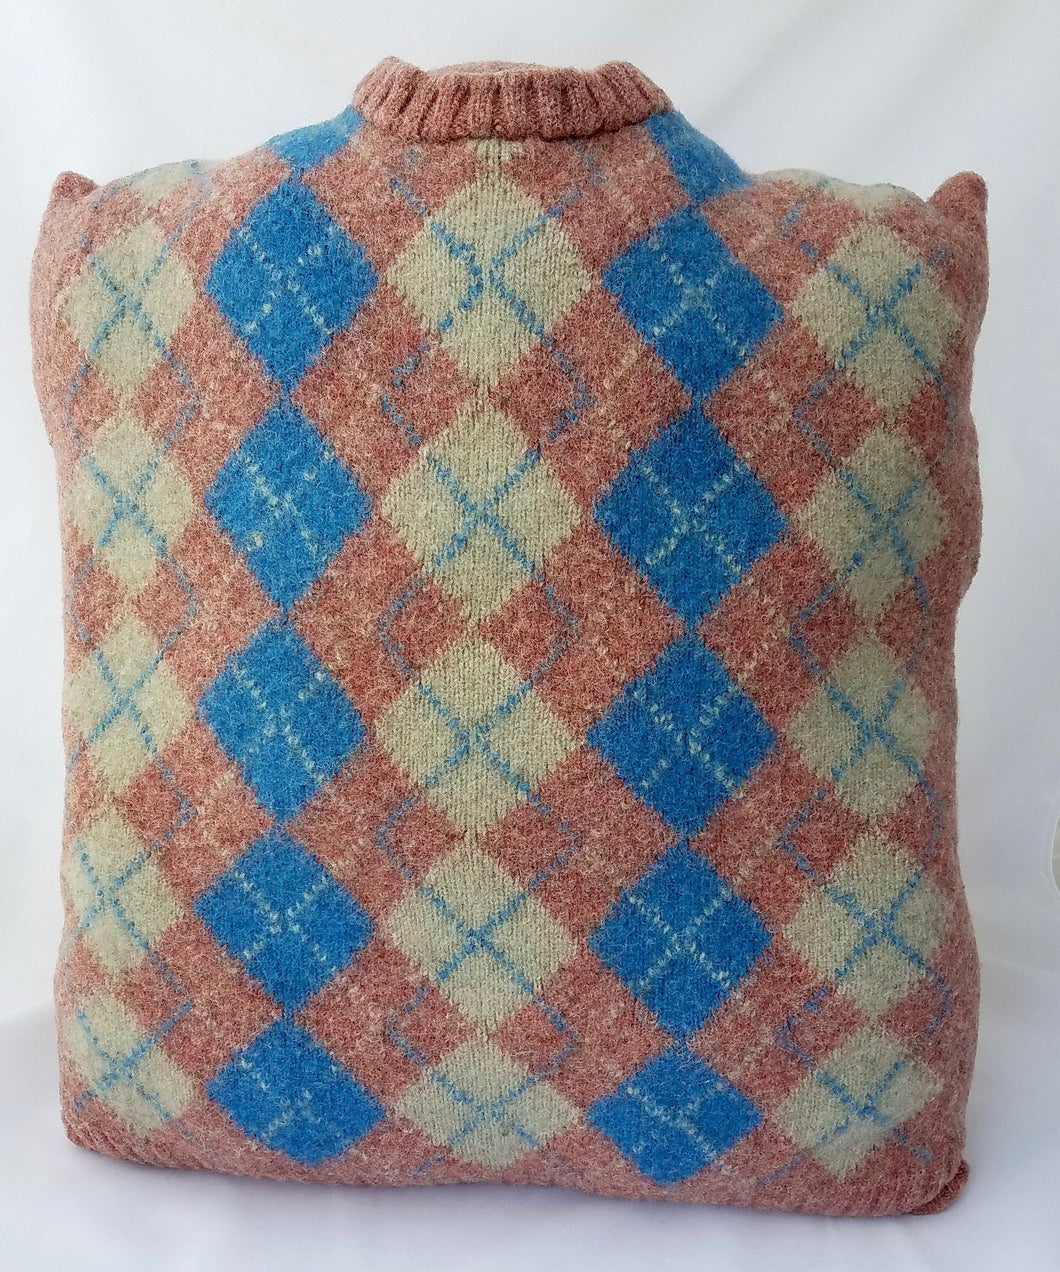 Upcycled Vintage Felted Pink Argyle Sweater Pillow